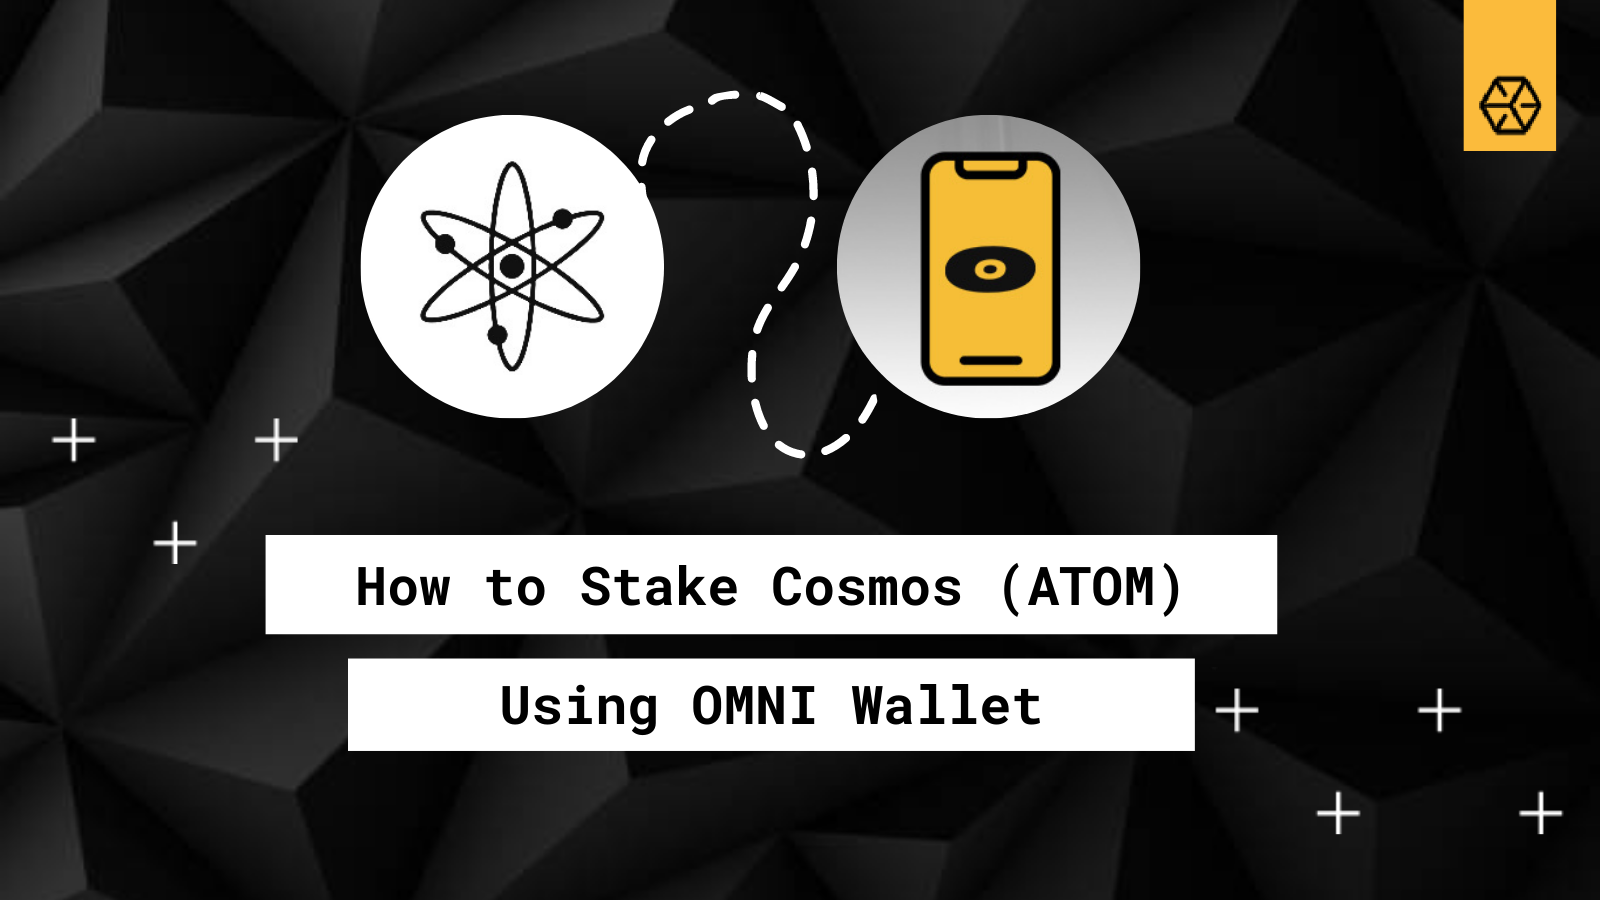 How to Stake Cosmos (ATOM) Using OMNI Wallet